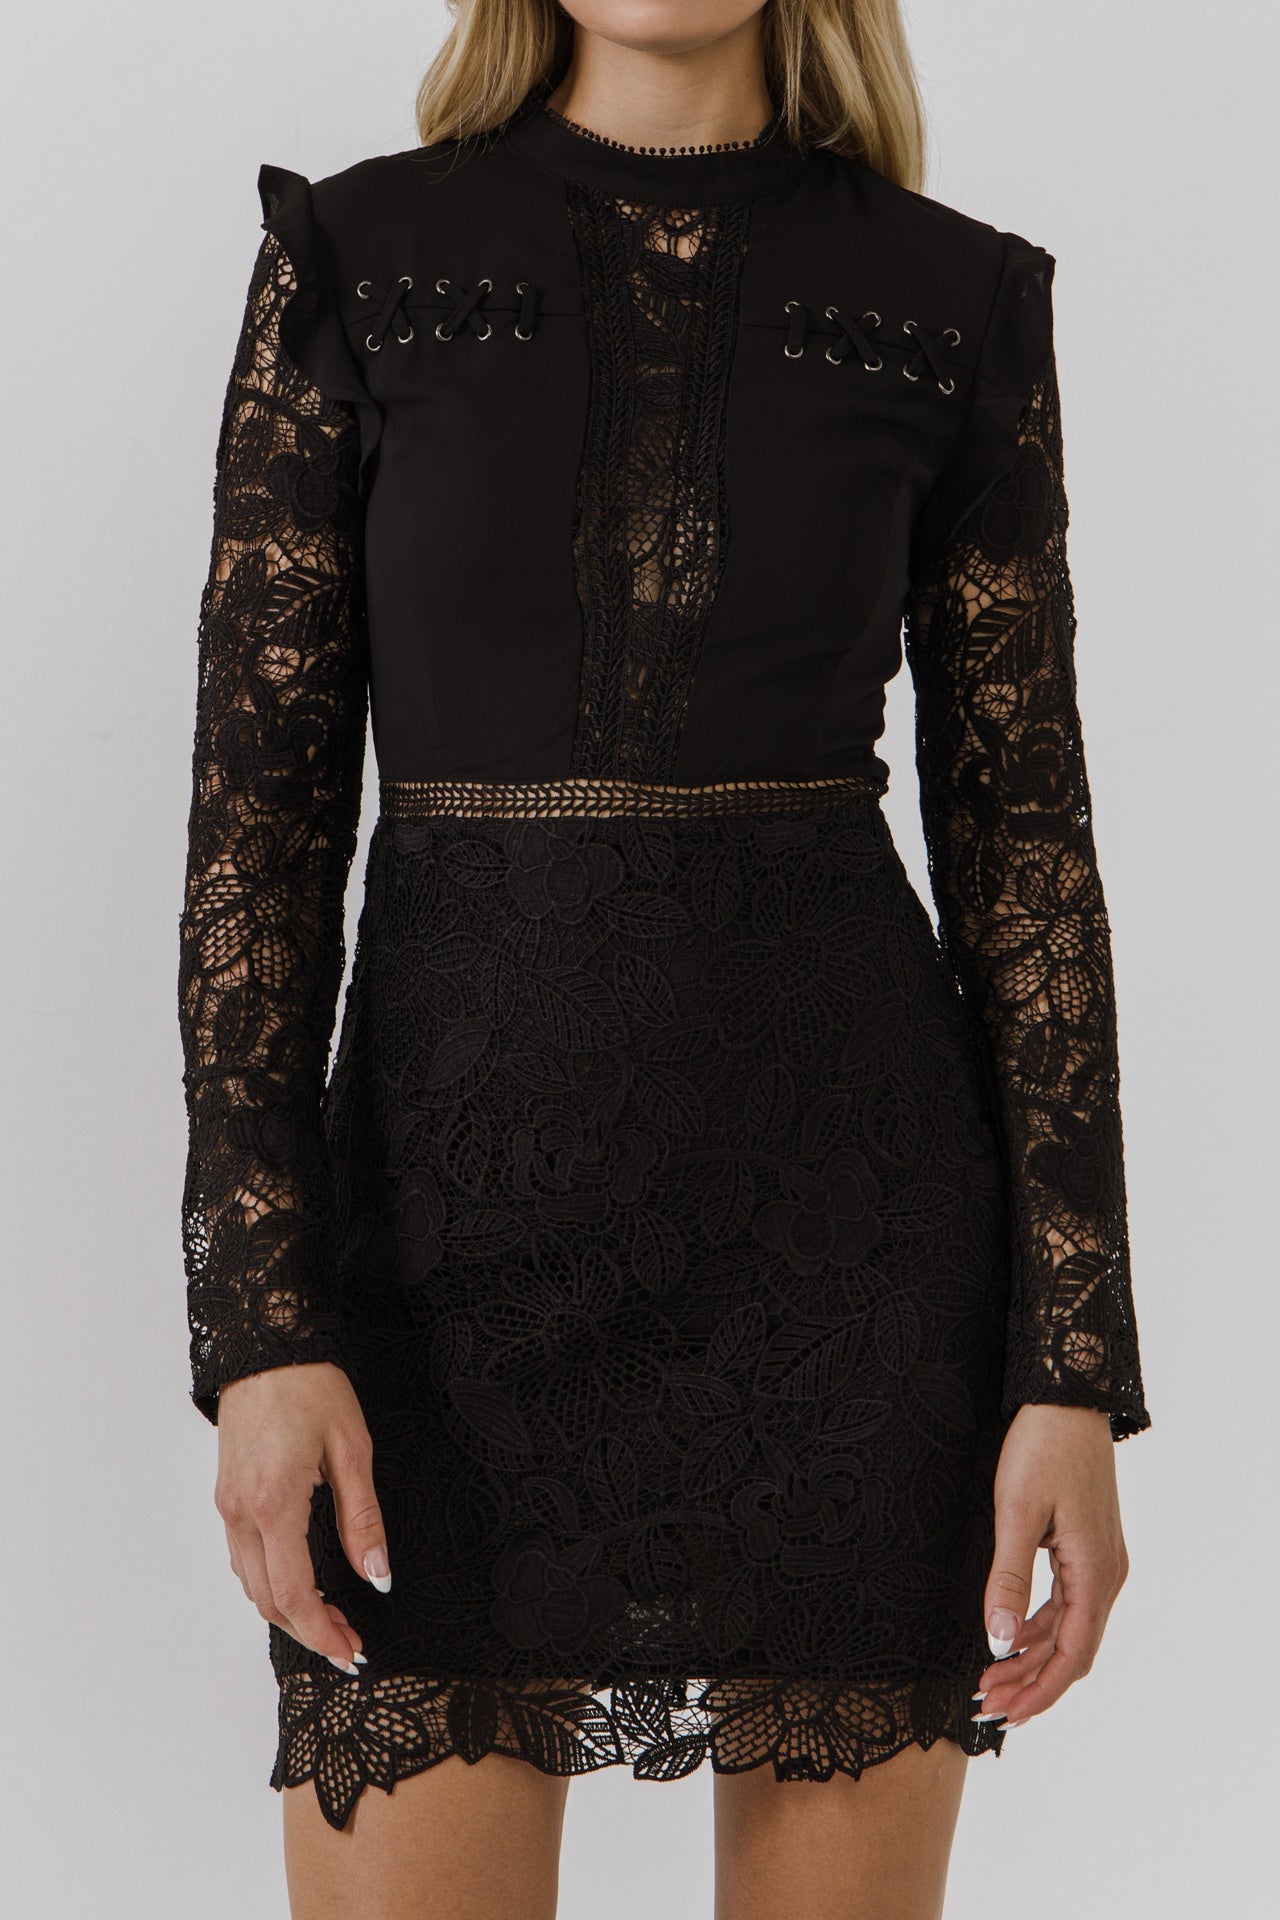 ENDLESS ROSE - Mini Dress With Eyelet Details and Lace Incets - DRESSES available at Objectrare